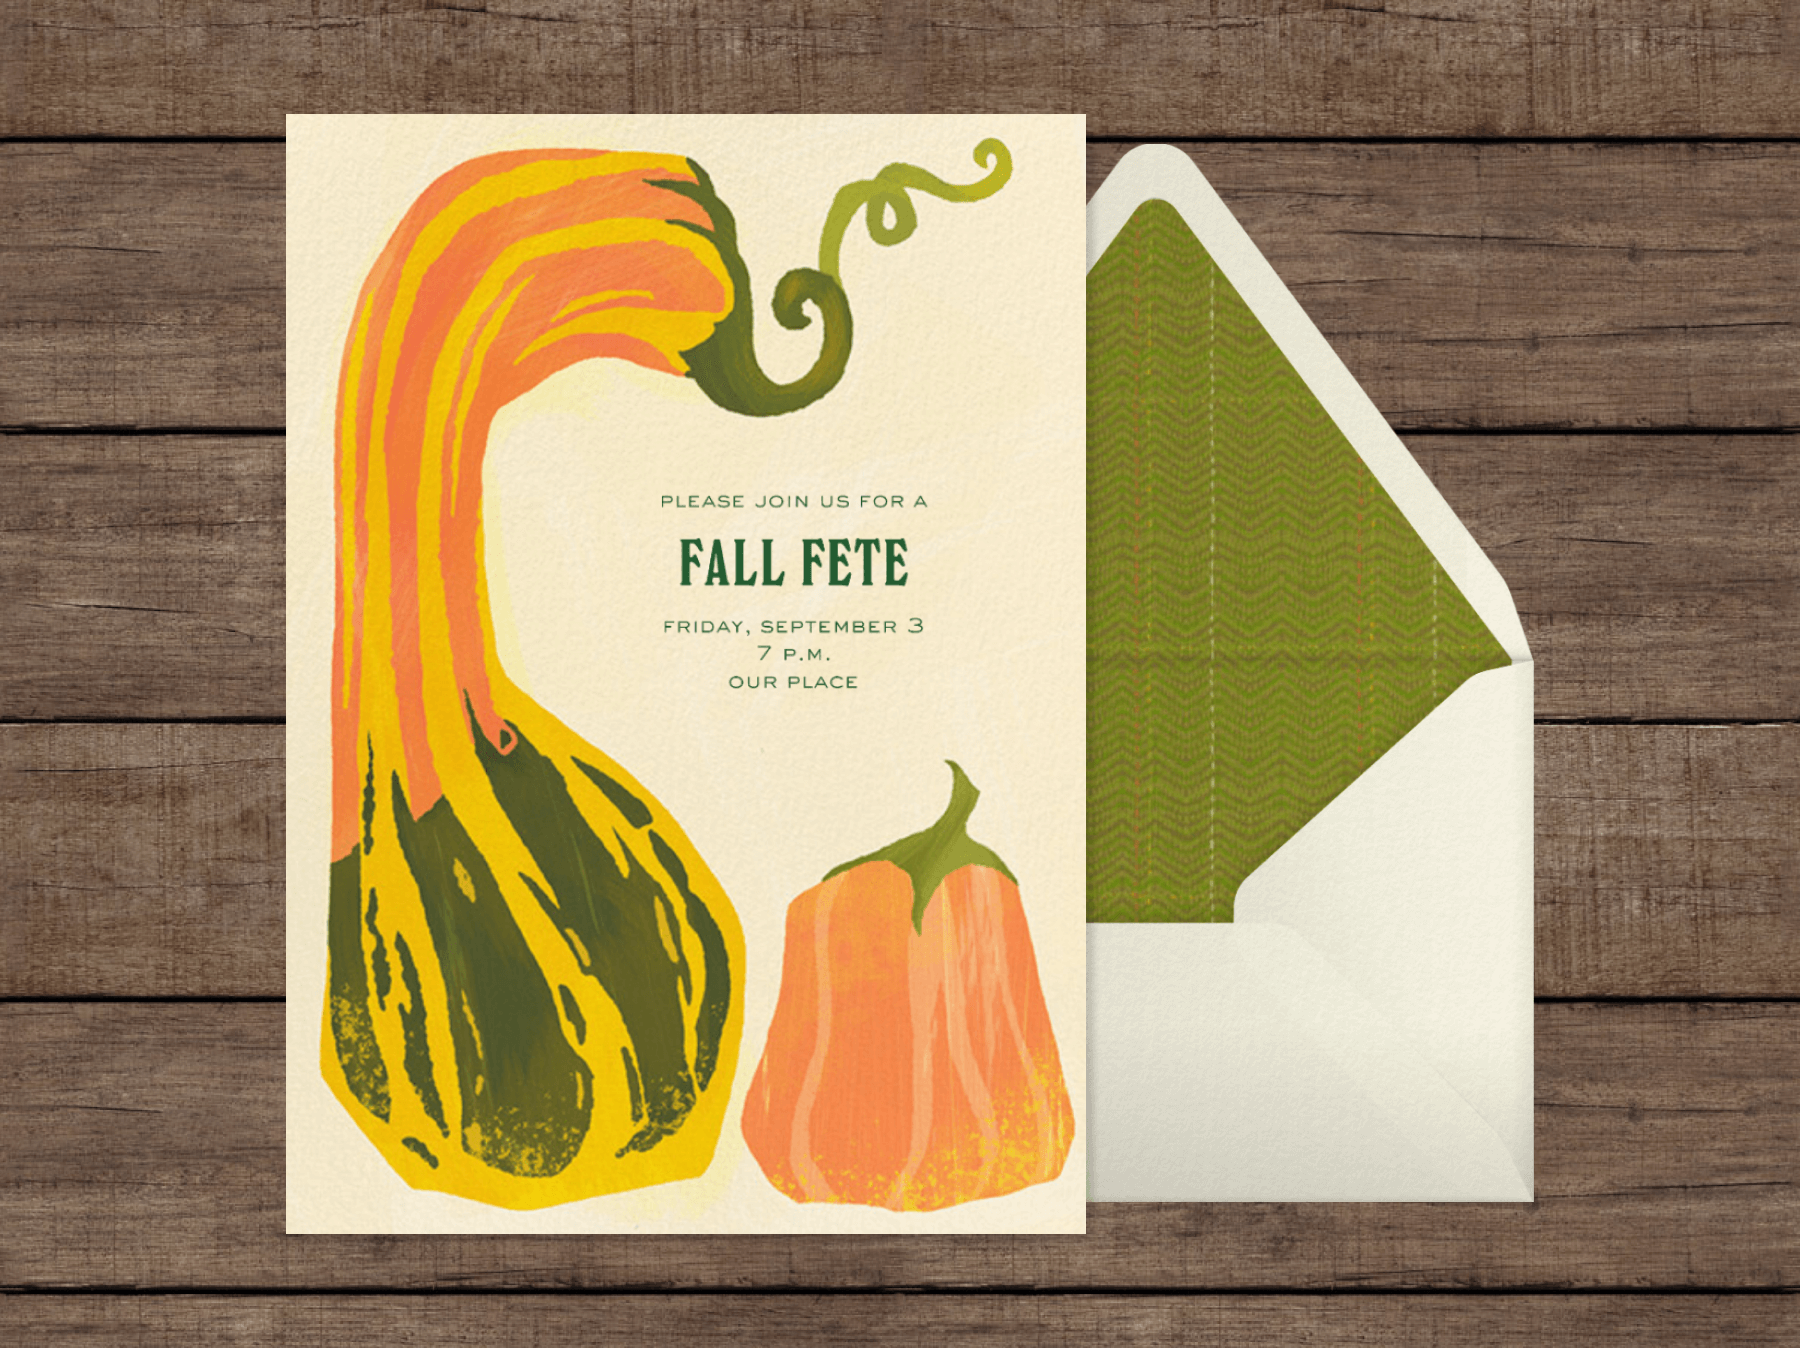 A fall invitation that features an illustration of two large gourds.